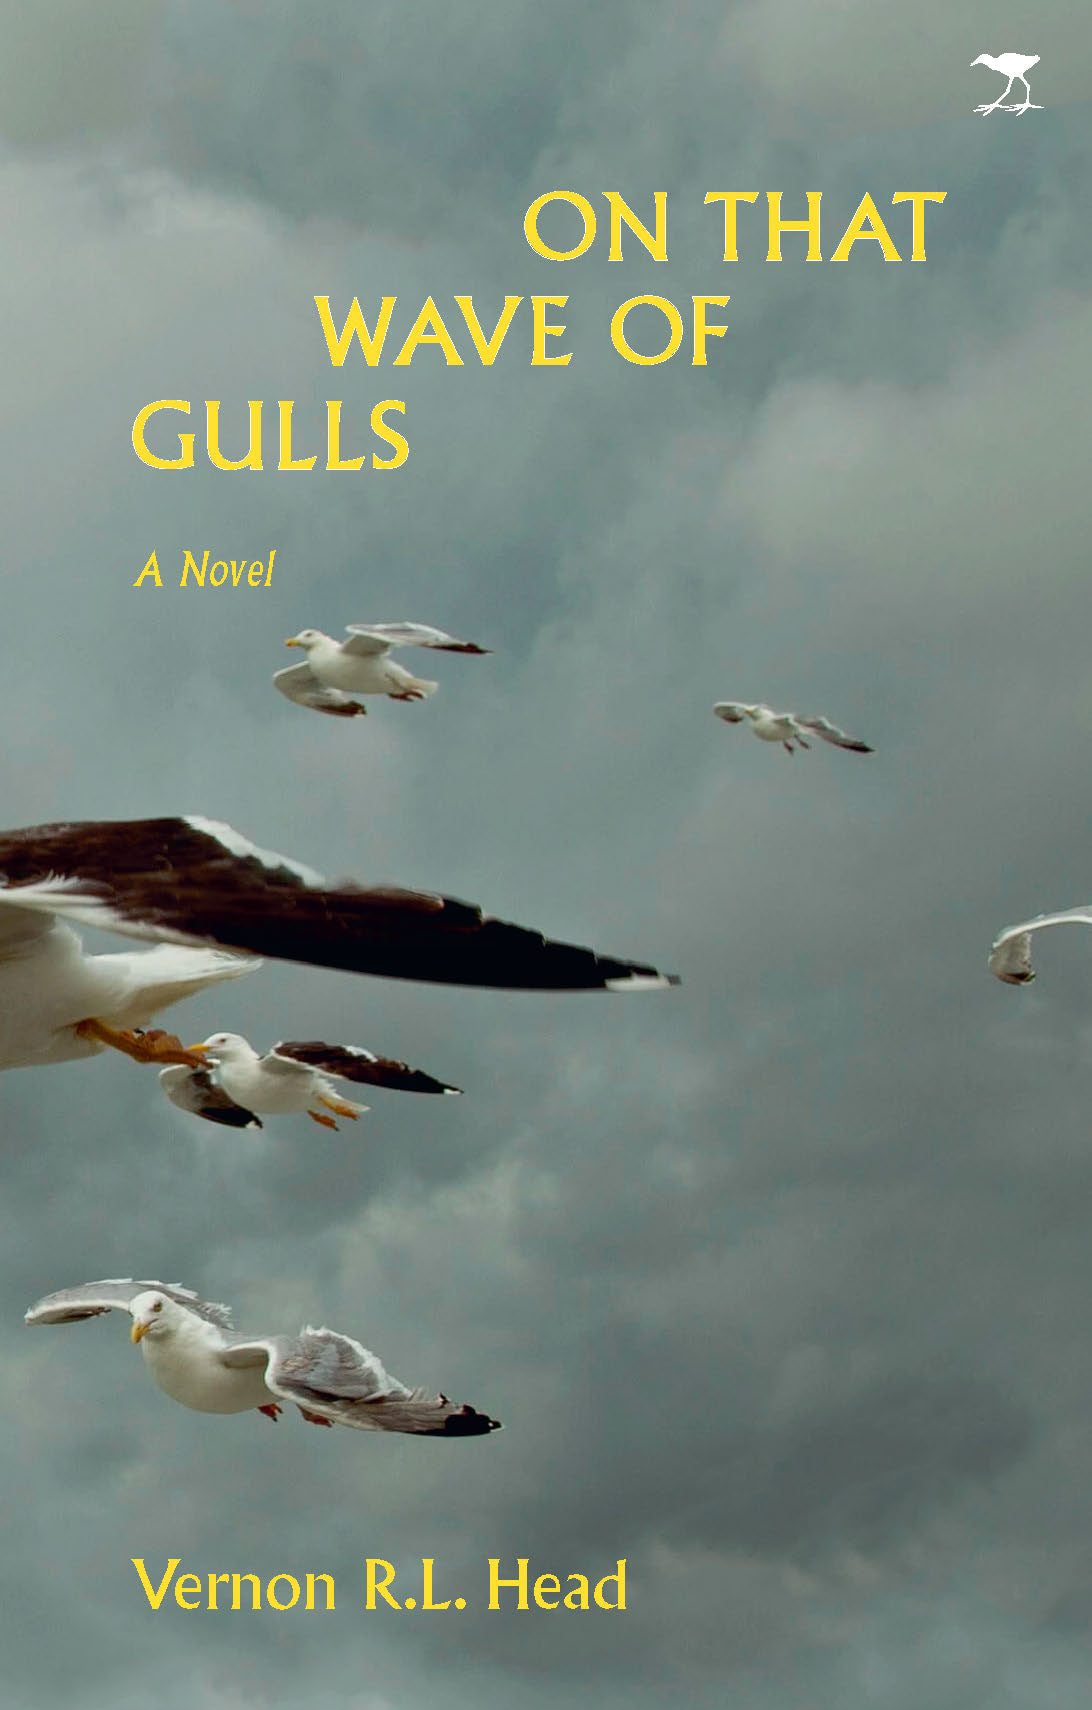 On that Wave of Gulls, by Vernon R.L. Head